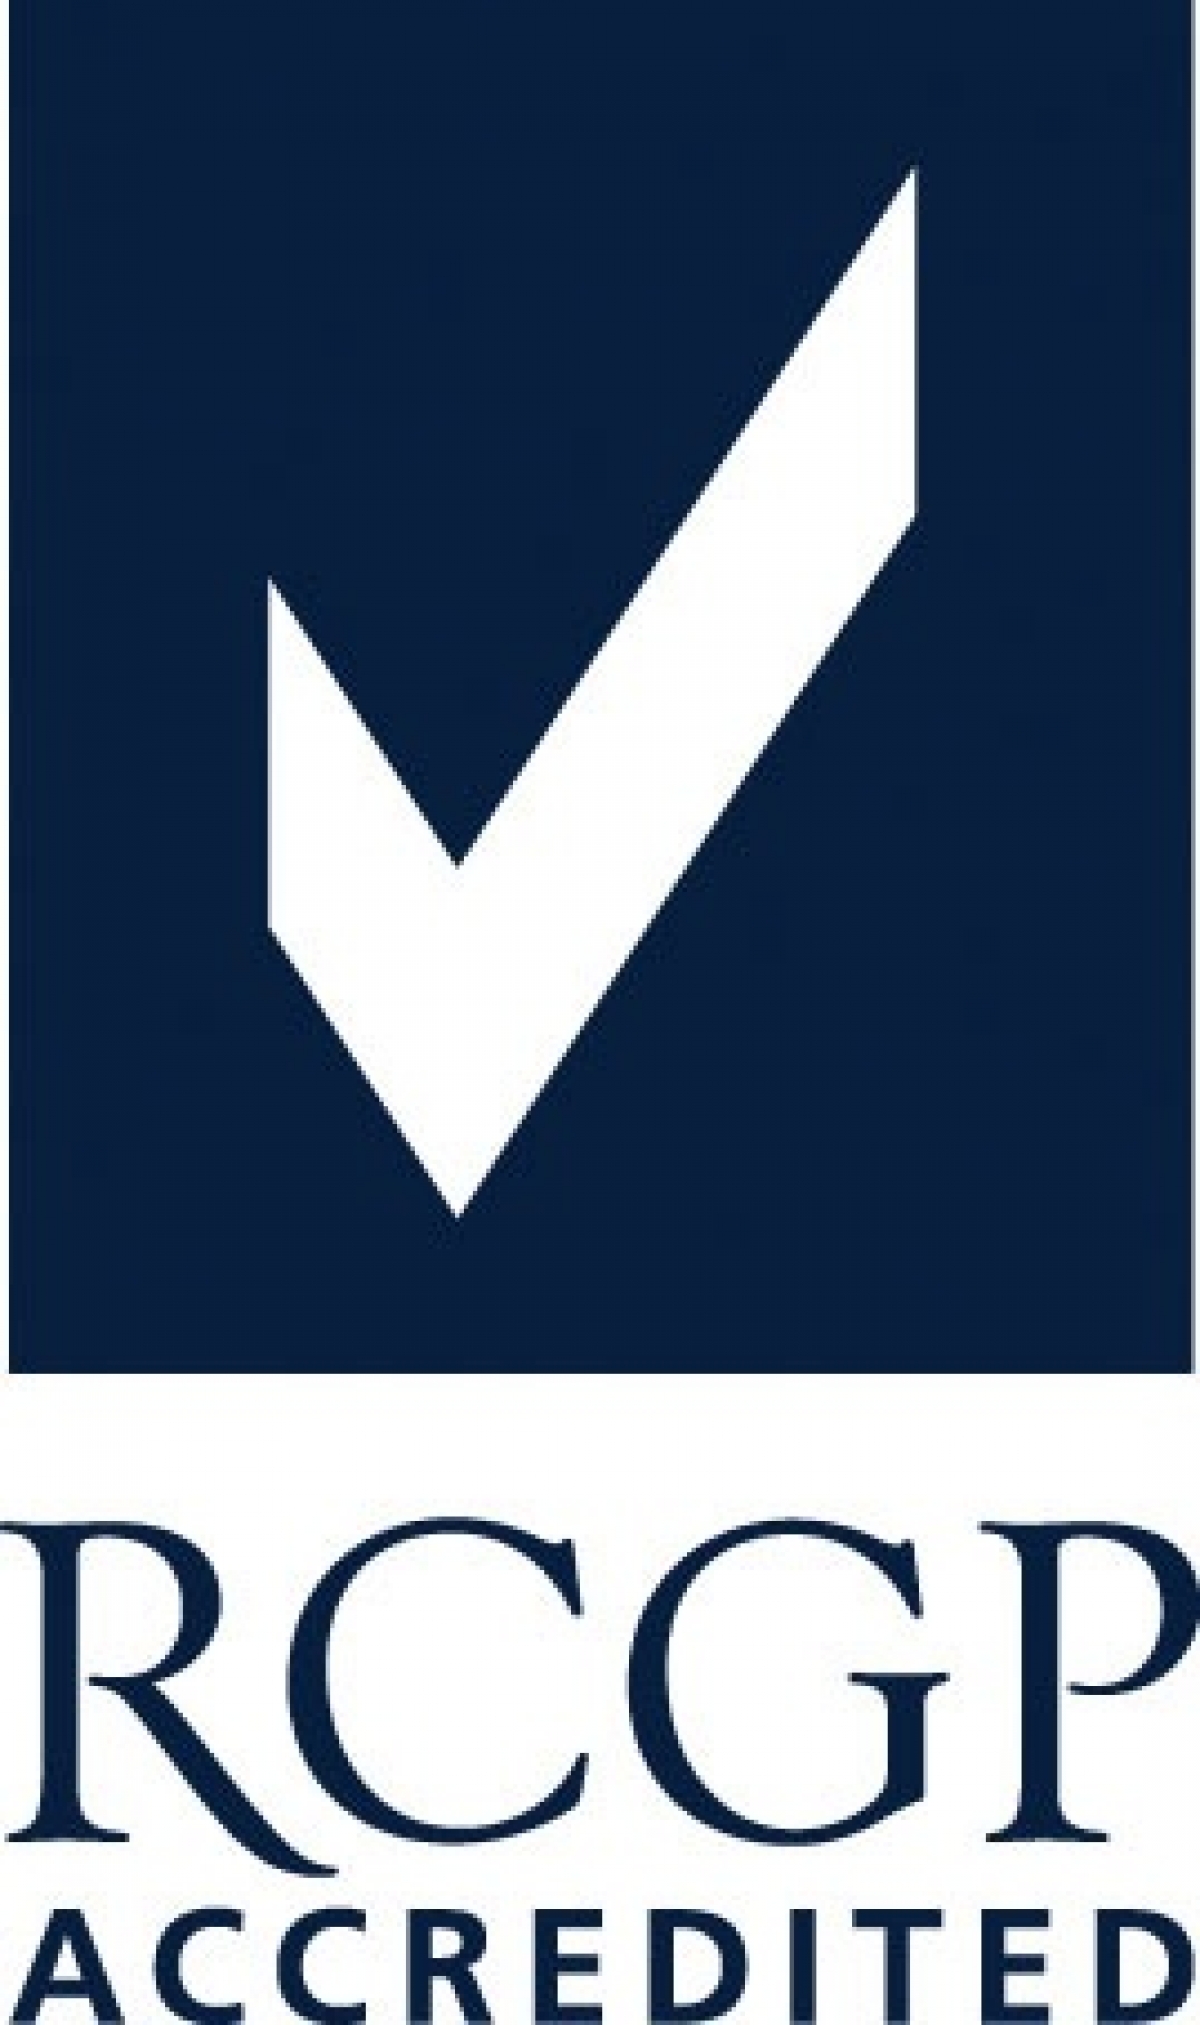 CDEP is re-accredited by the RCN and the RCGP for another 12 months!